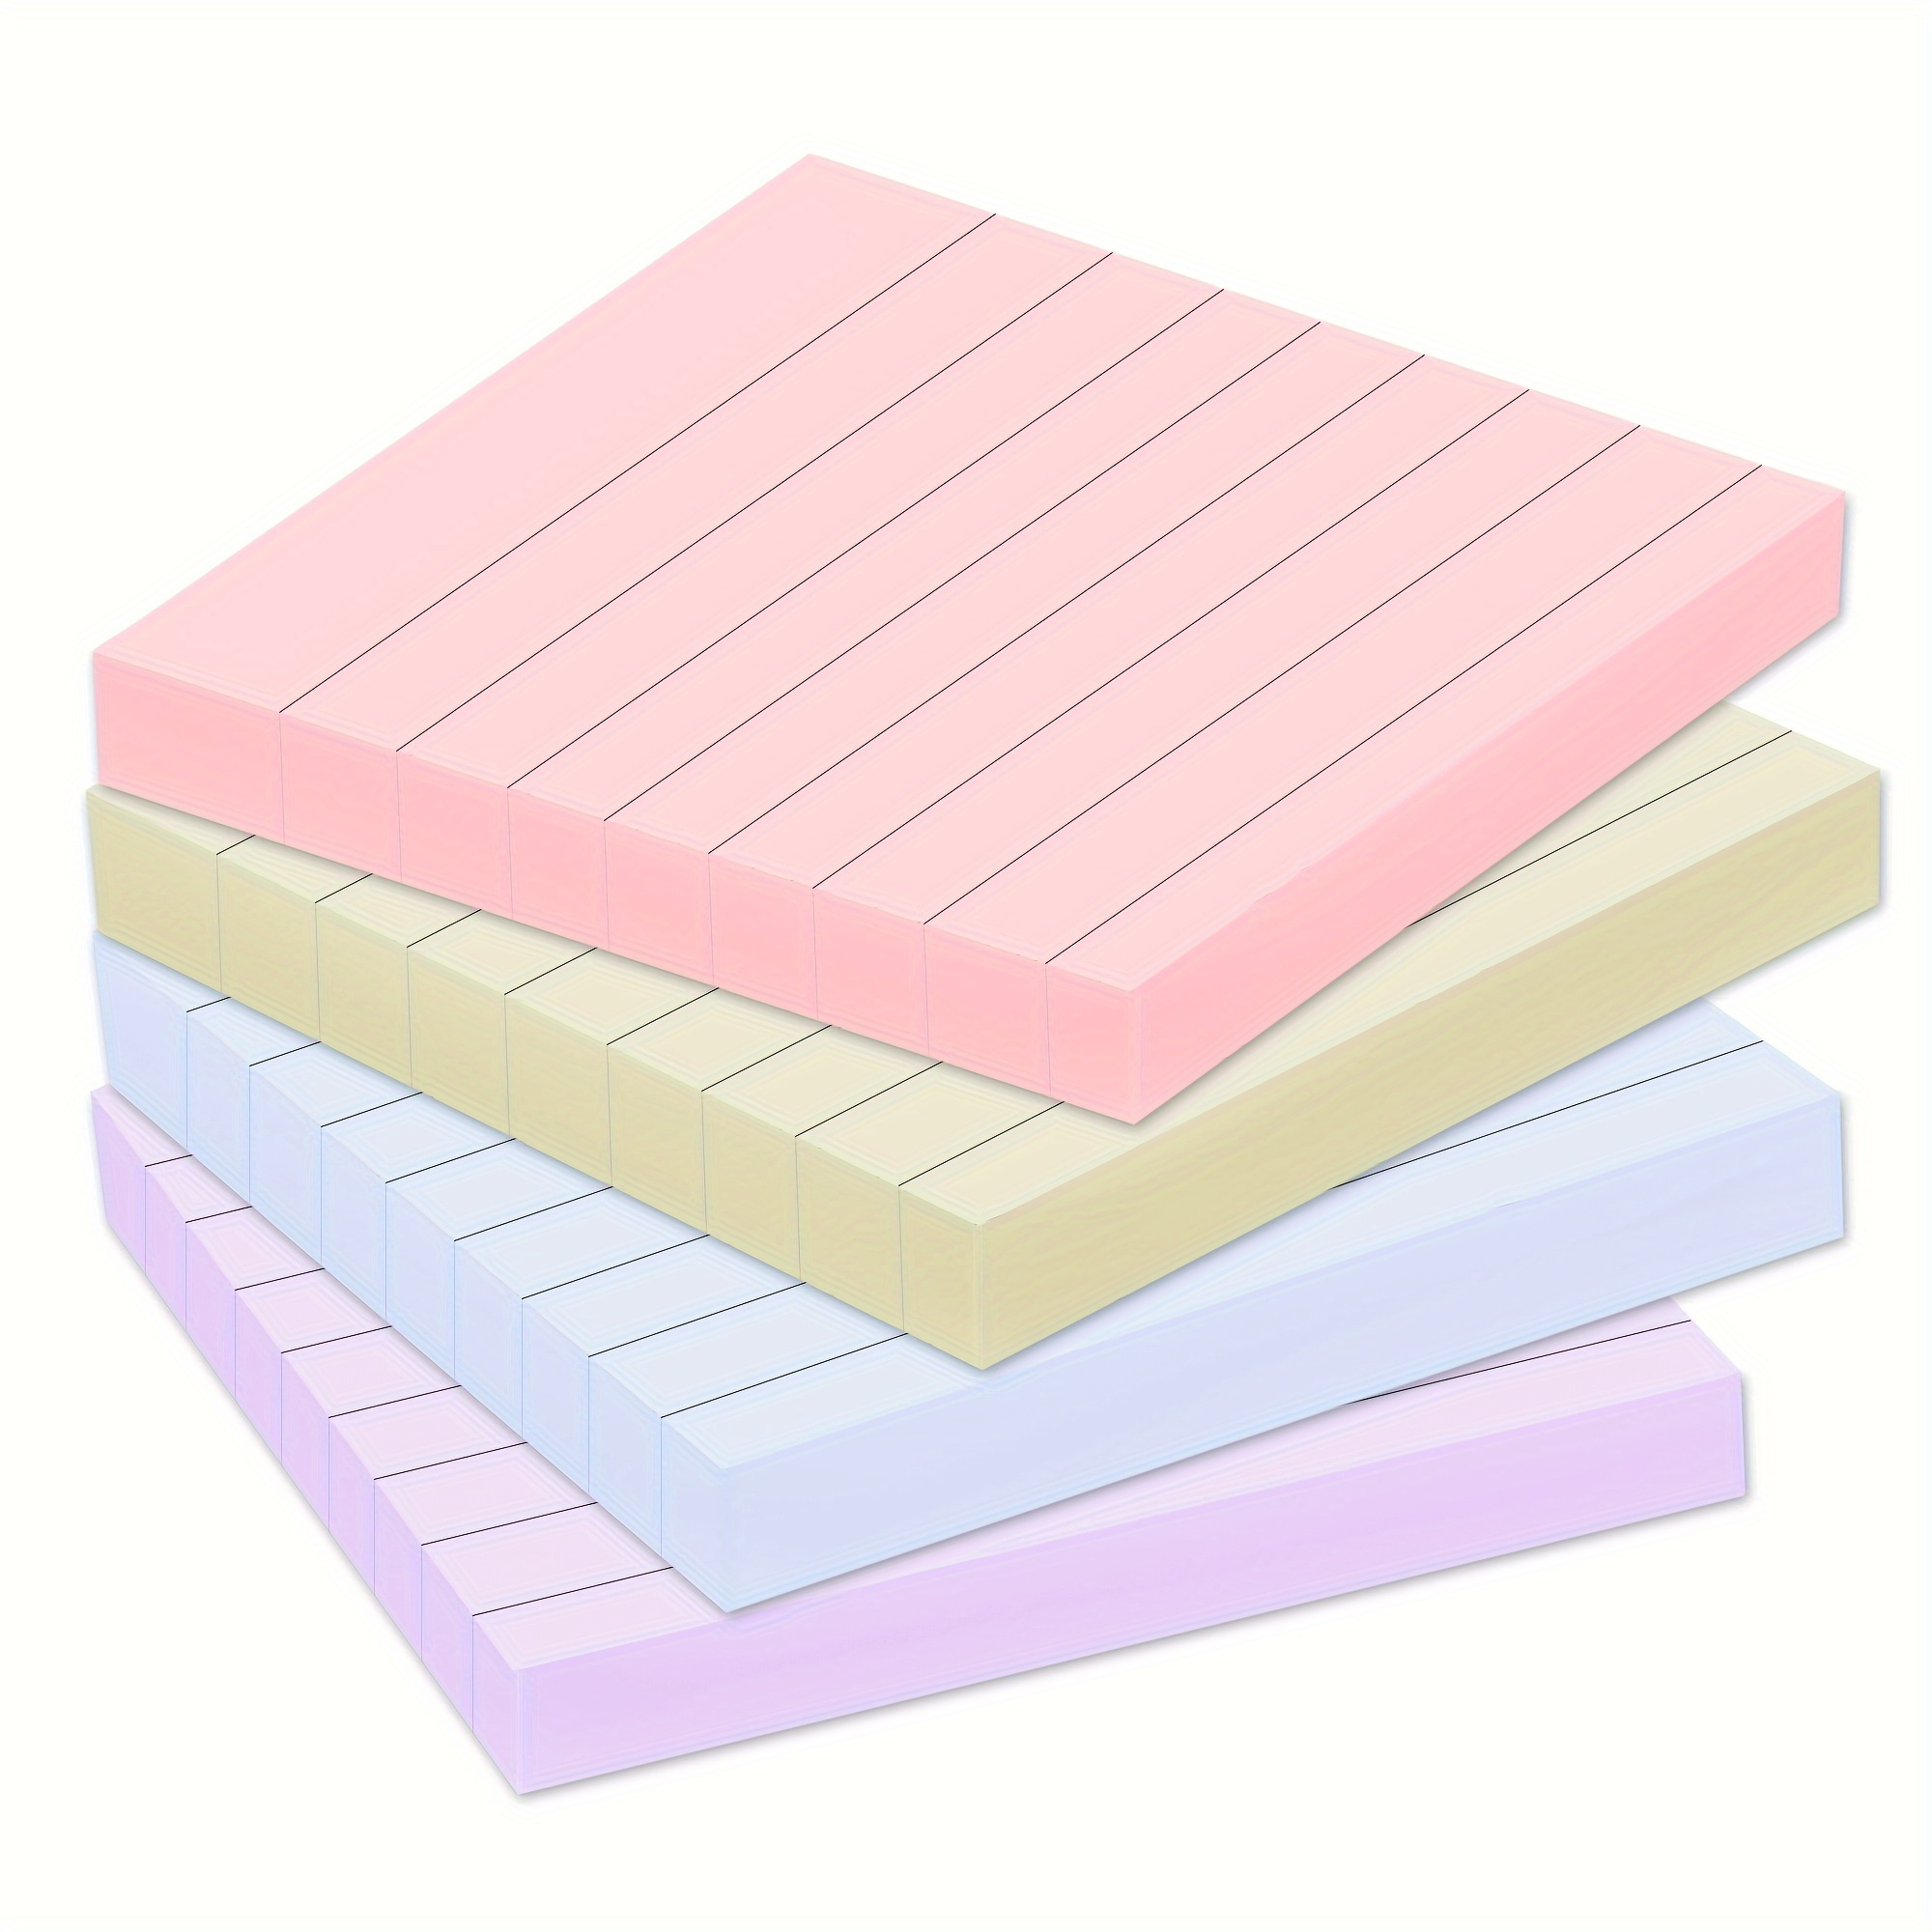 

4 Pads Lined Sticky Notes 3x3 In Pastel Ruled Sticky Notes Colorful Super Sticking Power Memo Pads With Strong Adhesive